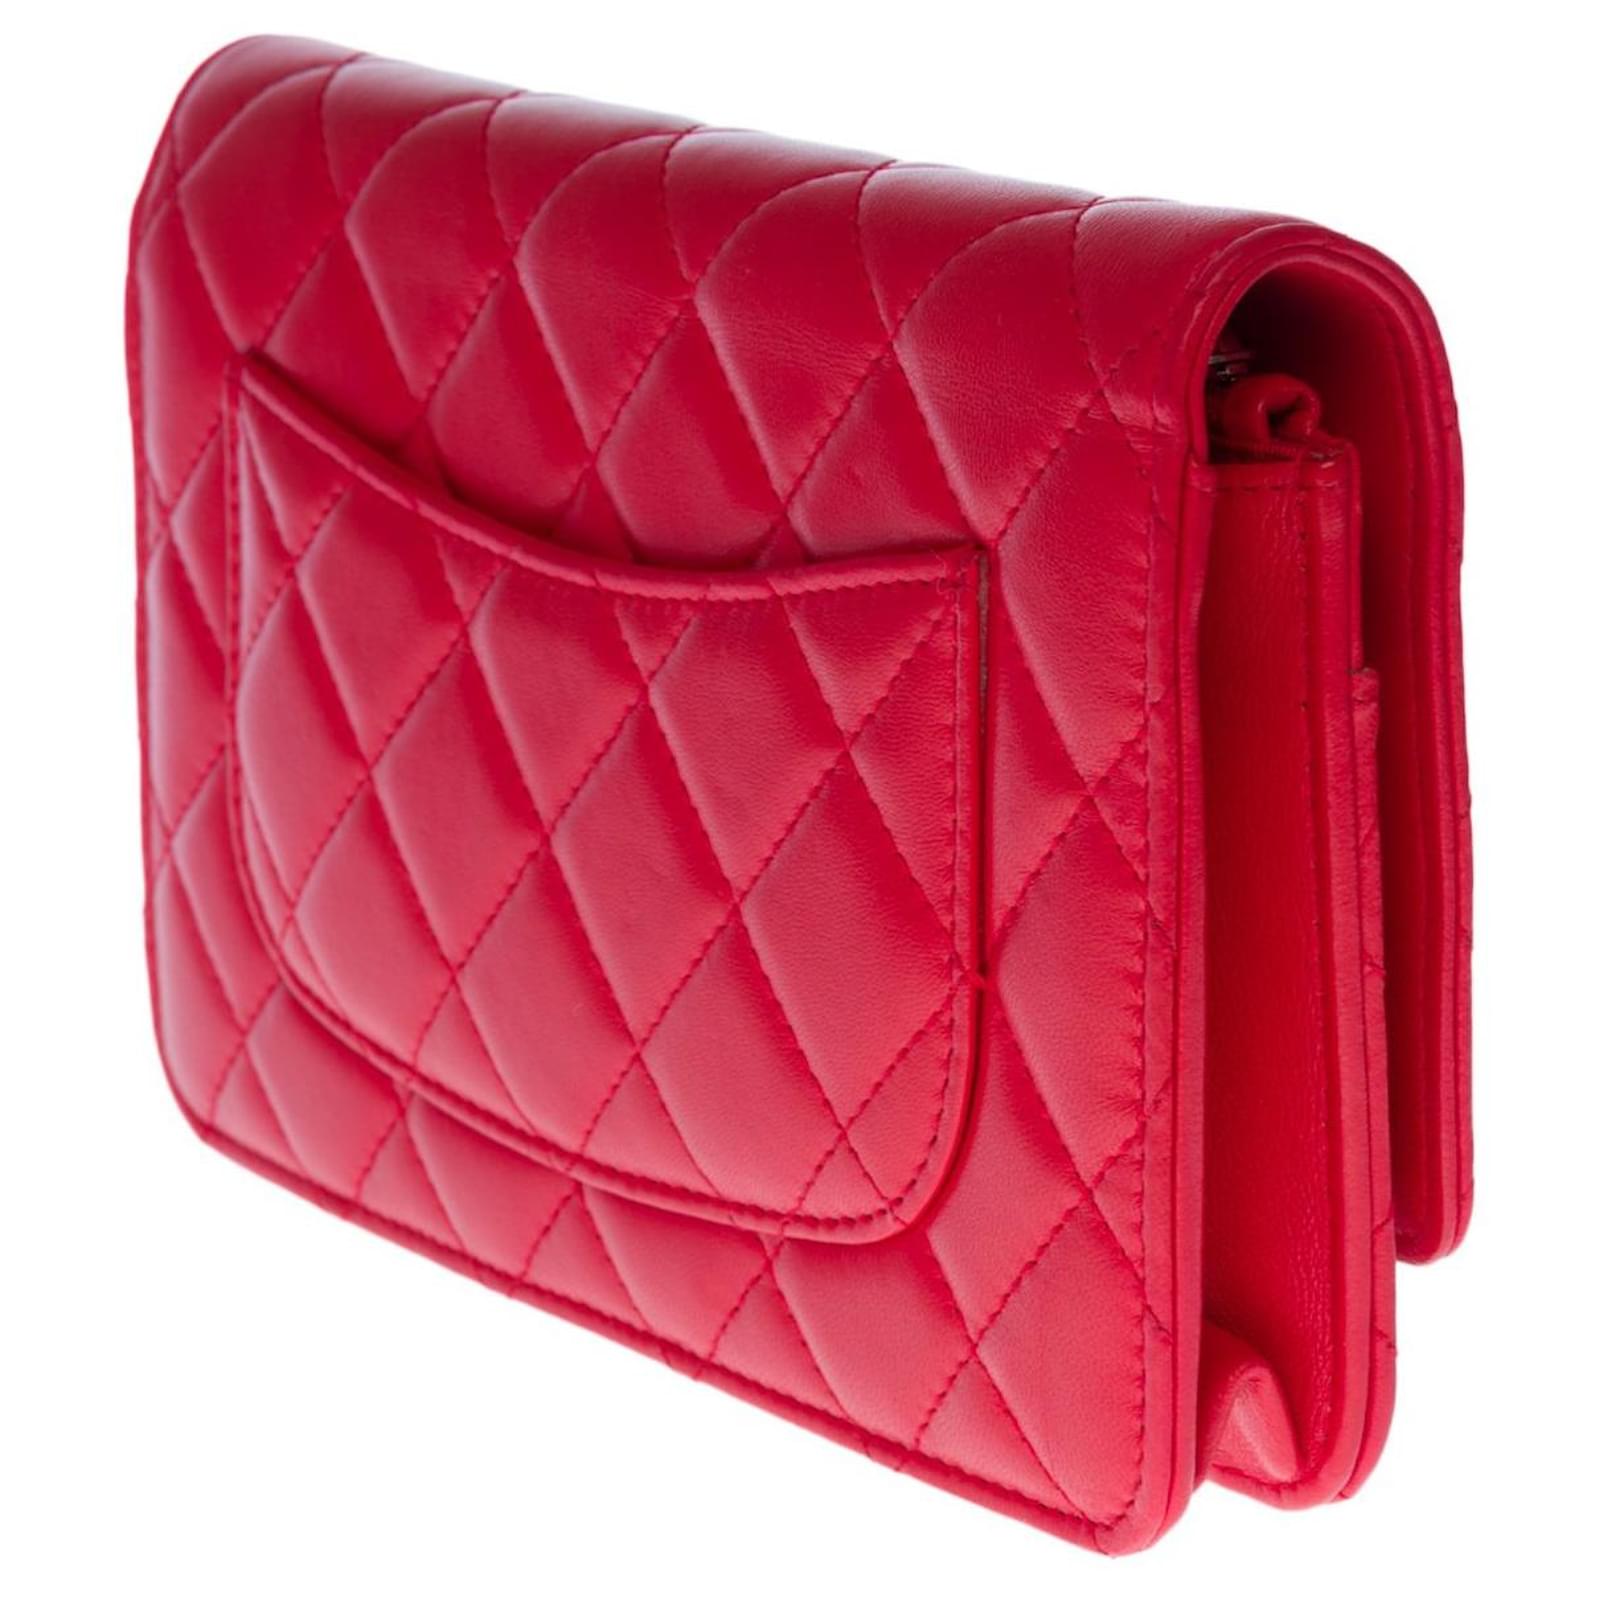 Lovely Chanel Wallet on Chain shoulder bag (WOC) in raspberry